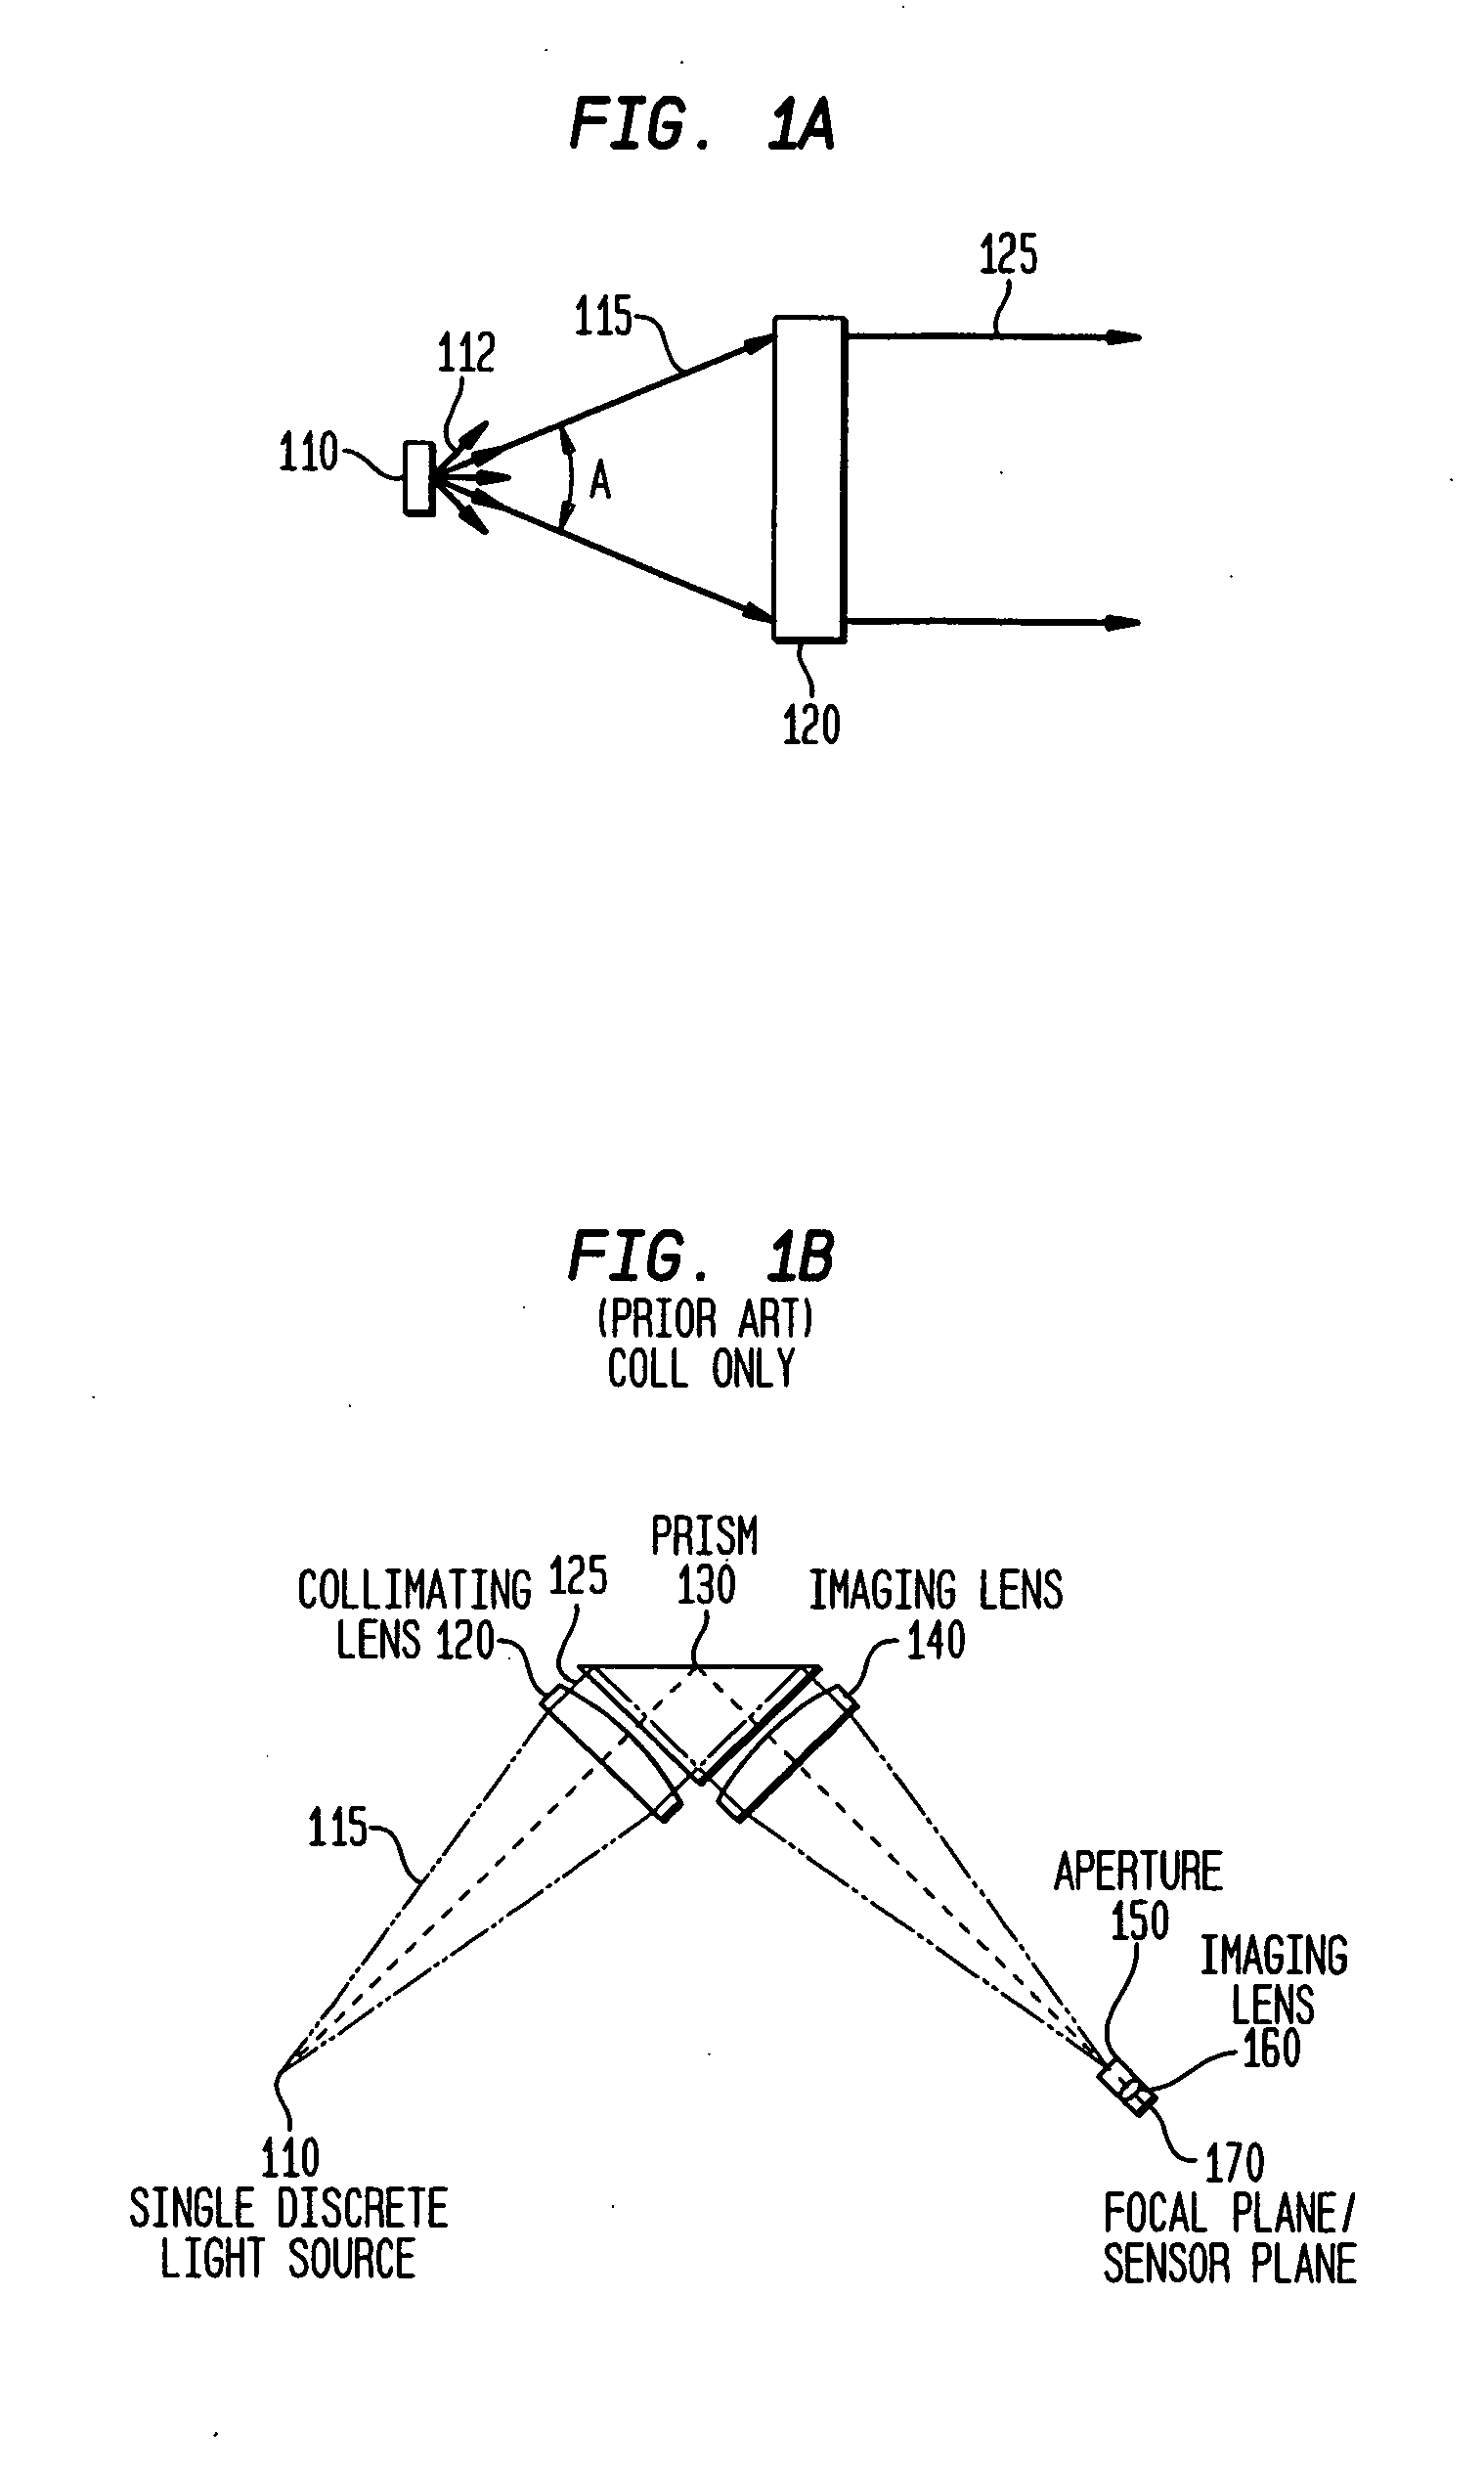 Systems and methods for illuminating a platen in a print scanner